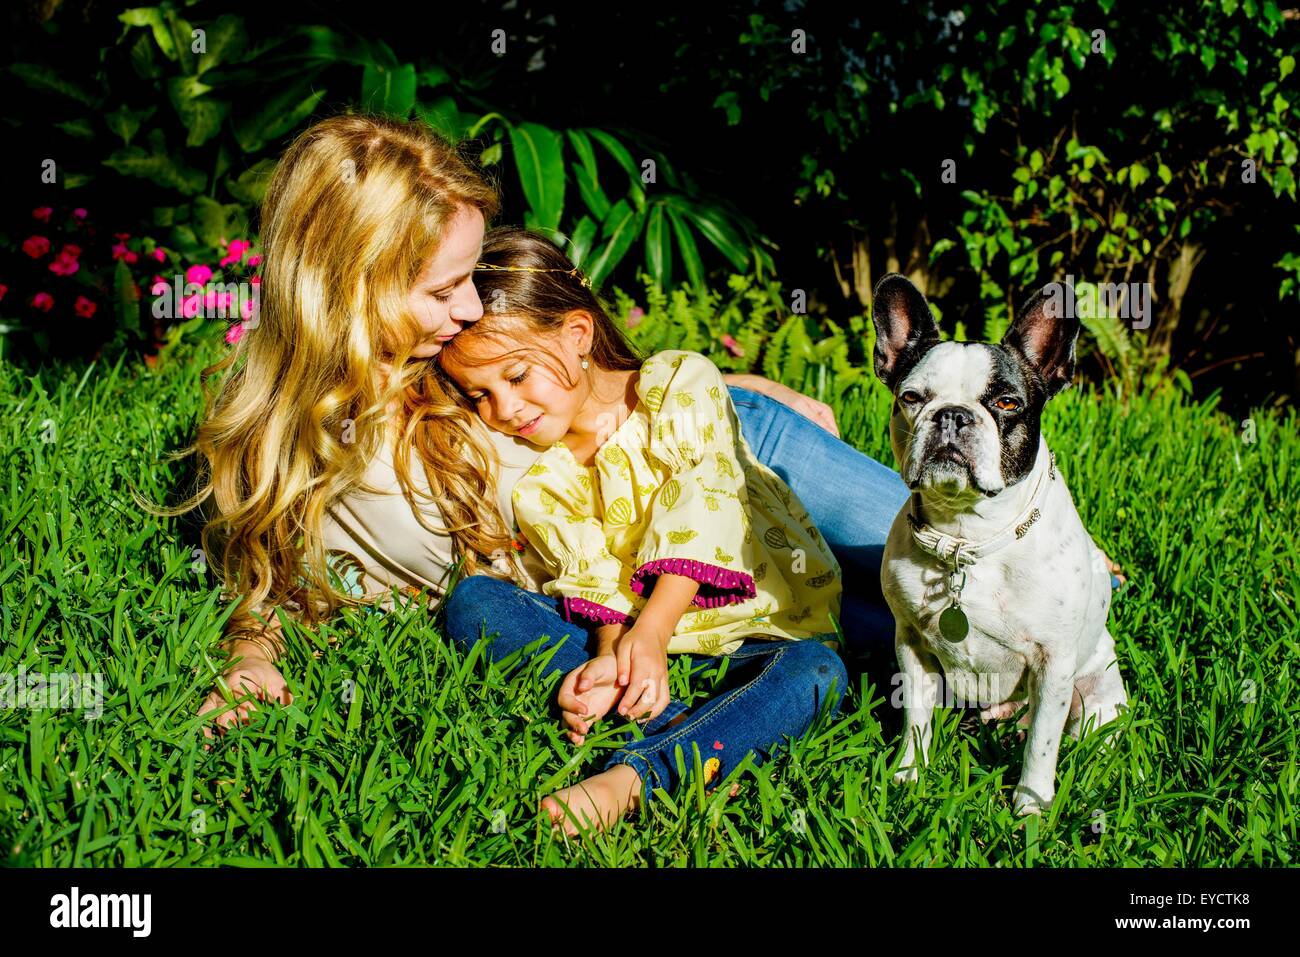 Mature woman, daughter and dog sitting in garden grass Stock Photo